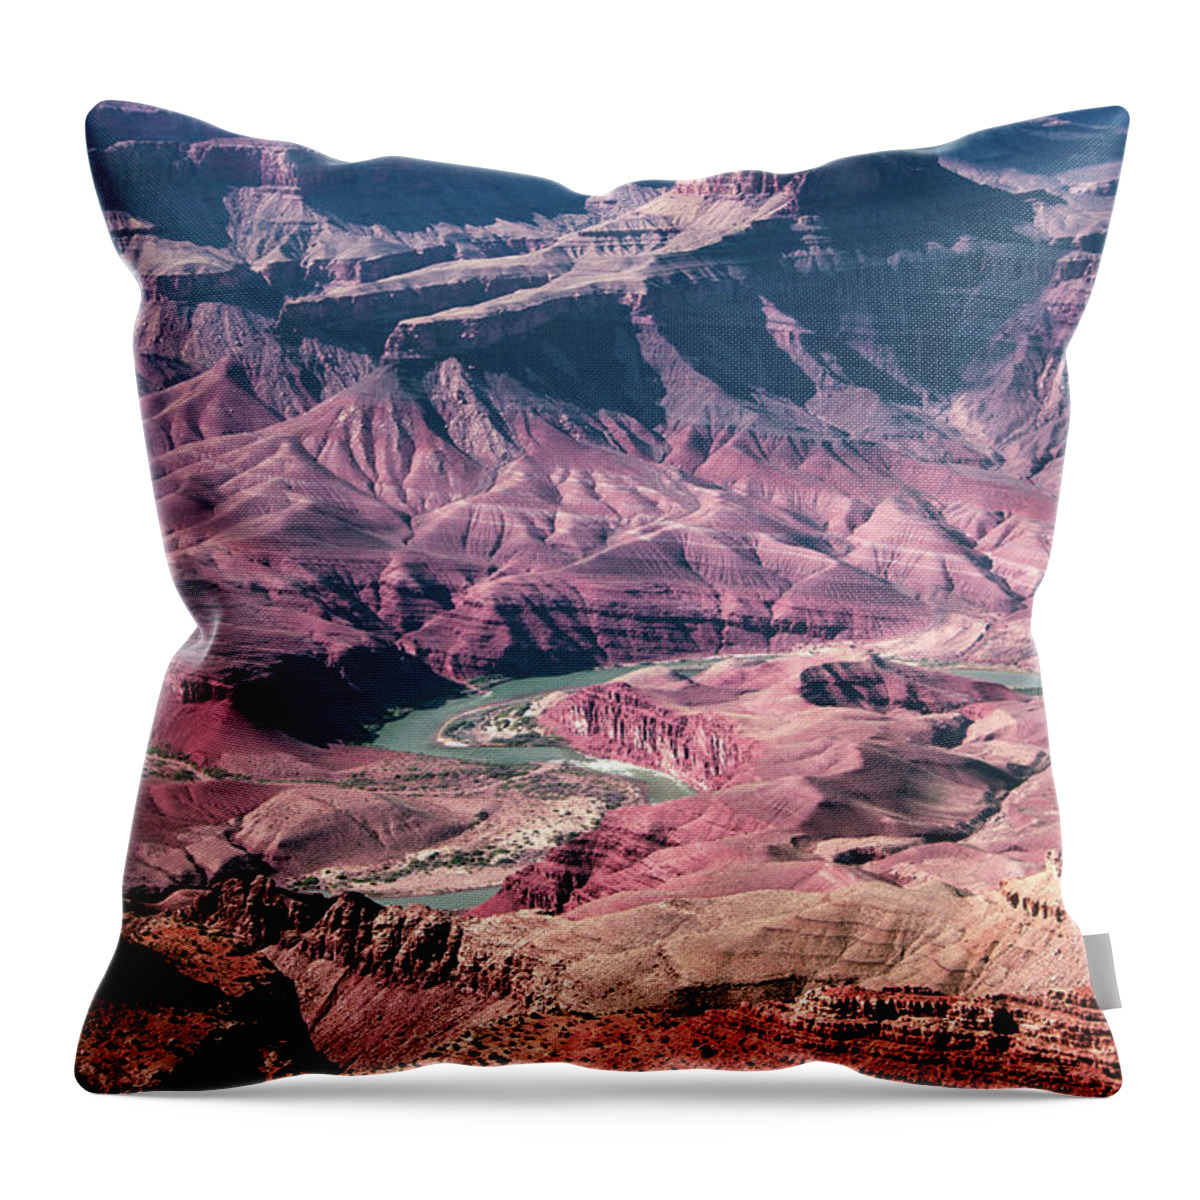 Scenics Throw Pillow featuring the photograph Grand Canyon,colorado River by Thanasis